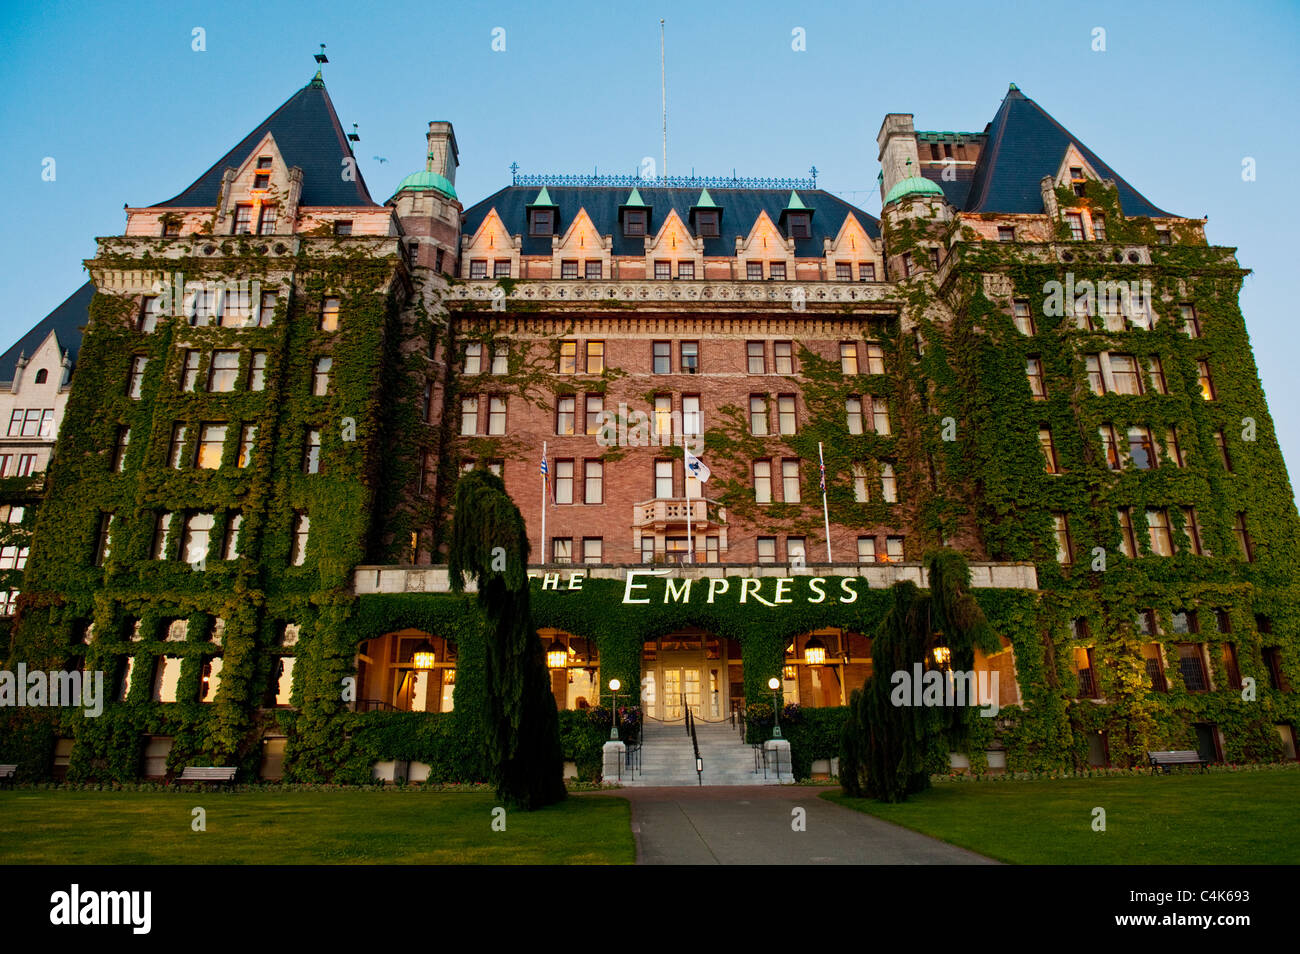 The Empress Hotel, located on the inner harbor,is one of the oldest and most famous hotels in Victoria, British Columbia, Canada Stock Photo